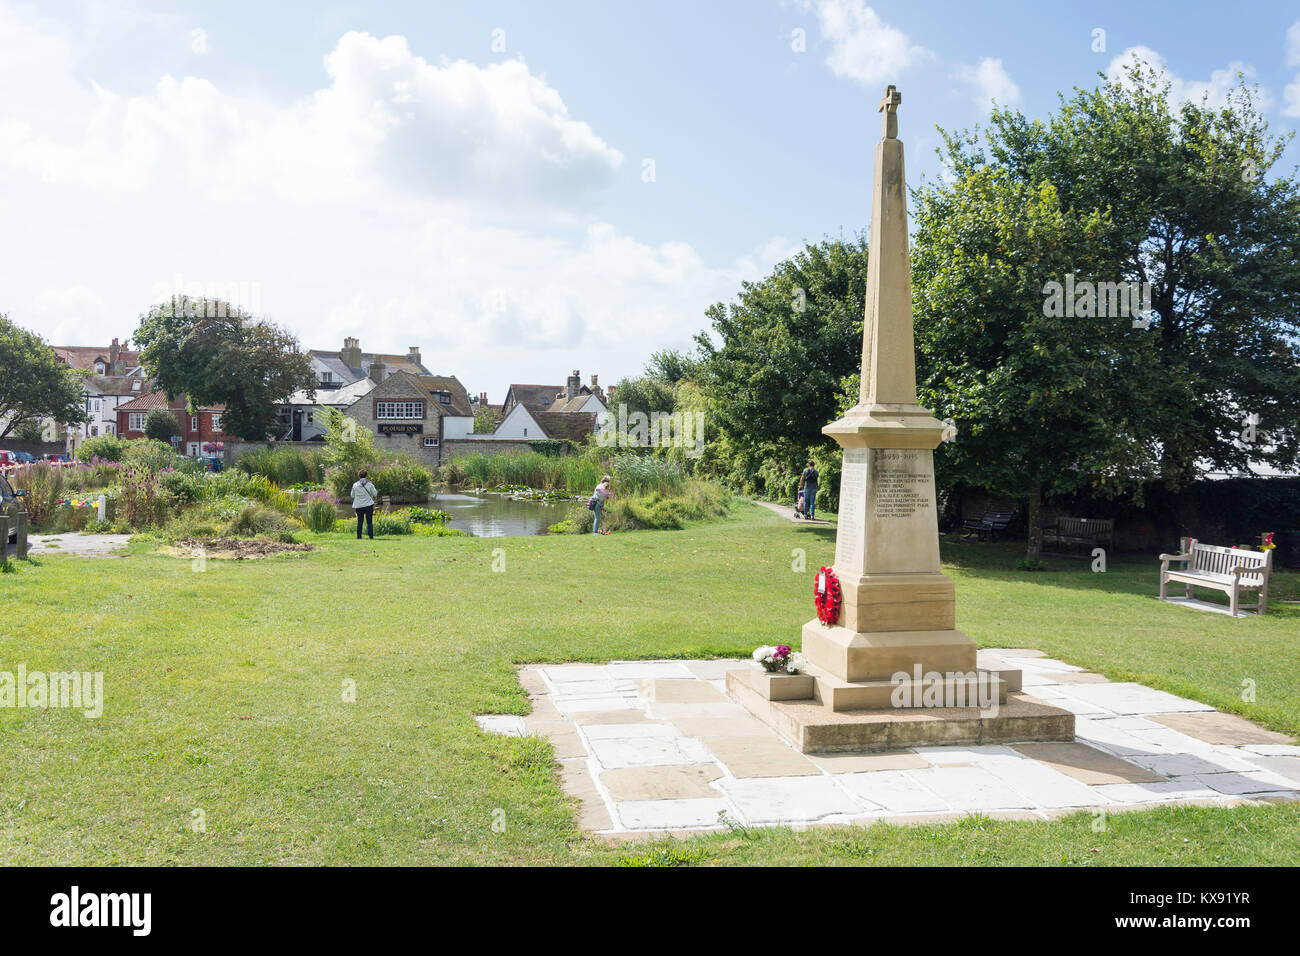 The pond and war memorial on The Green, Rottingdean, East Sussex, England, United Kingdom Stock Photo